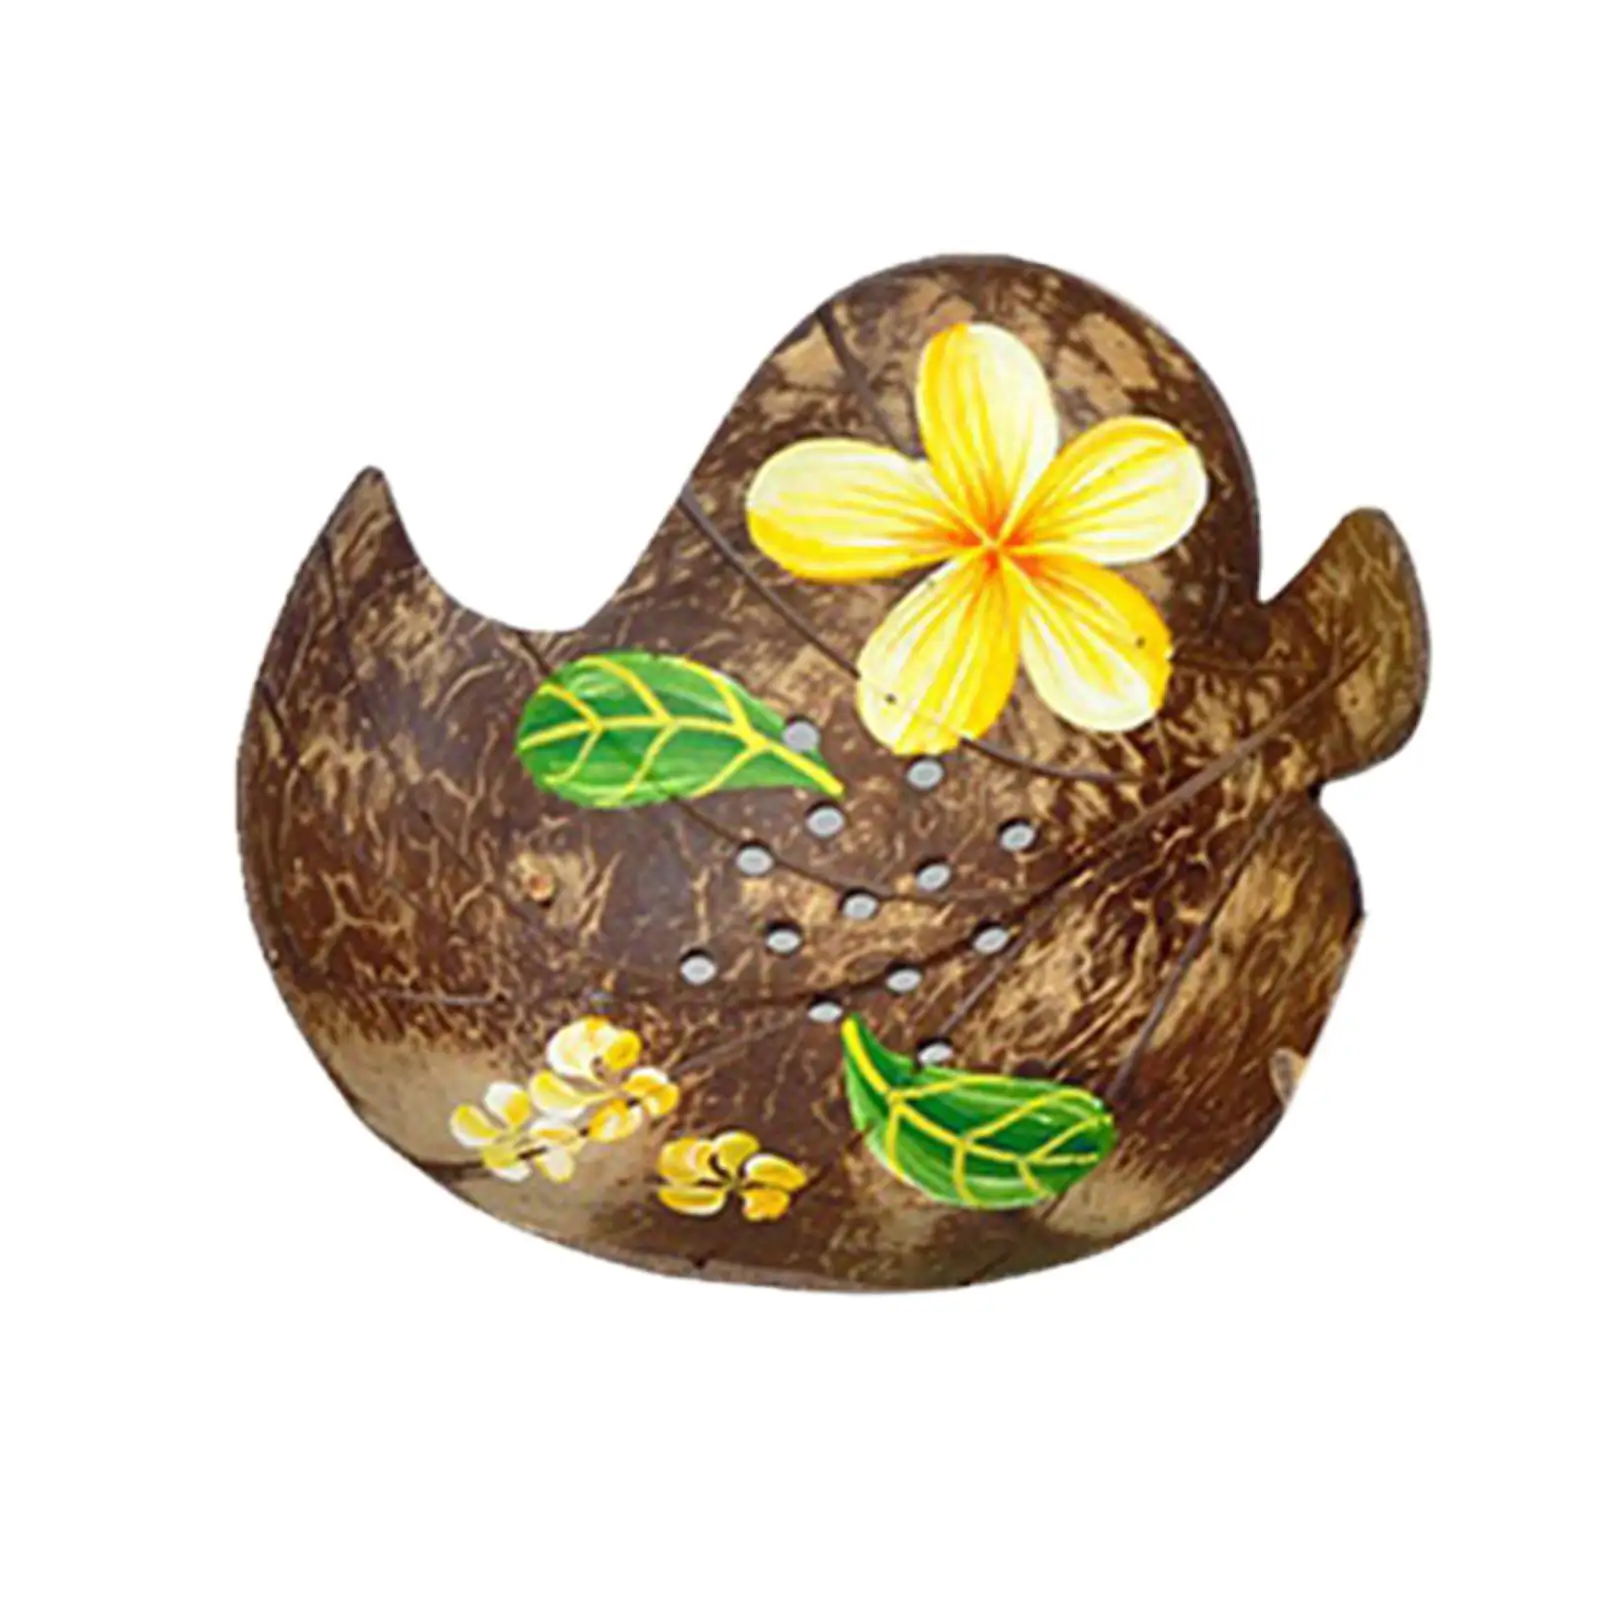 Coconut Shell Soap Dish Novelty Shower Soap Holder Jewelry Holder for Kitchen Household Countertop Bathroom Supplies